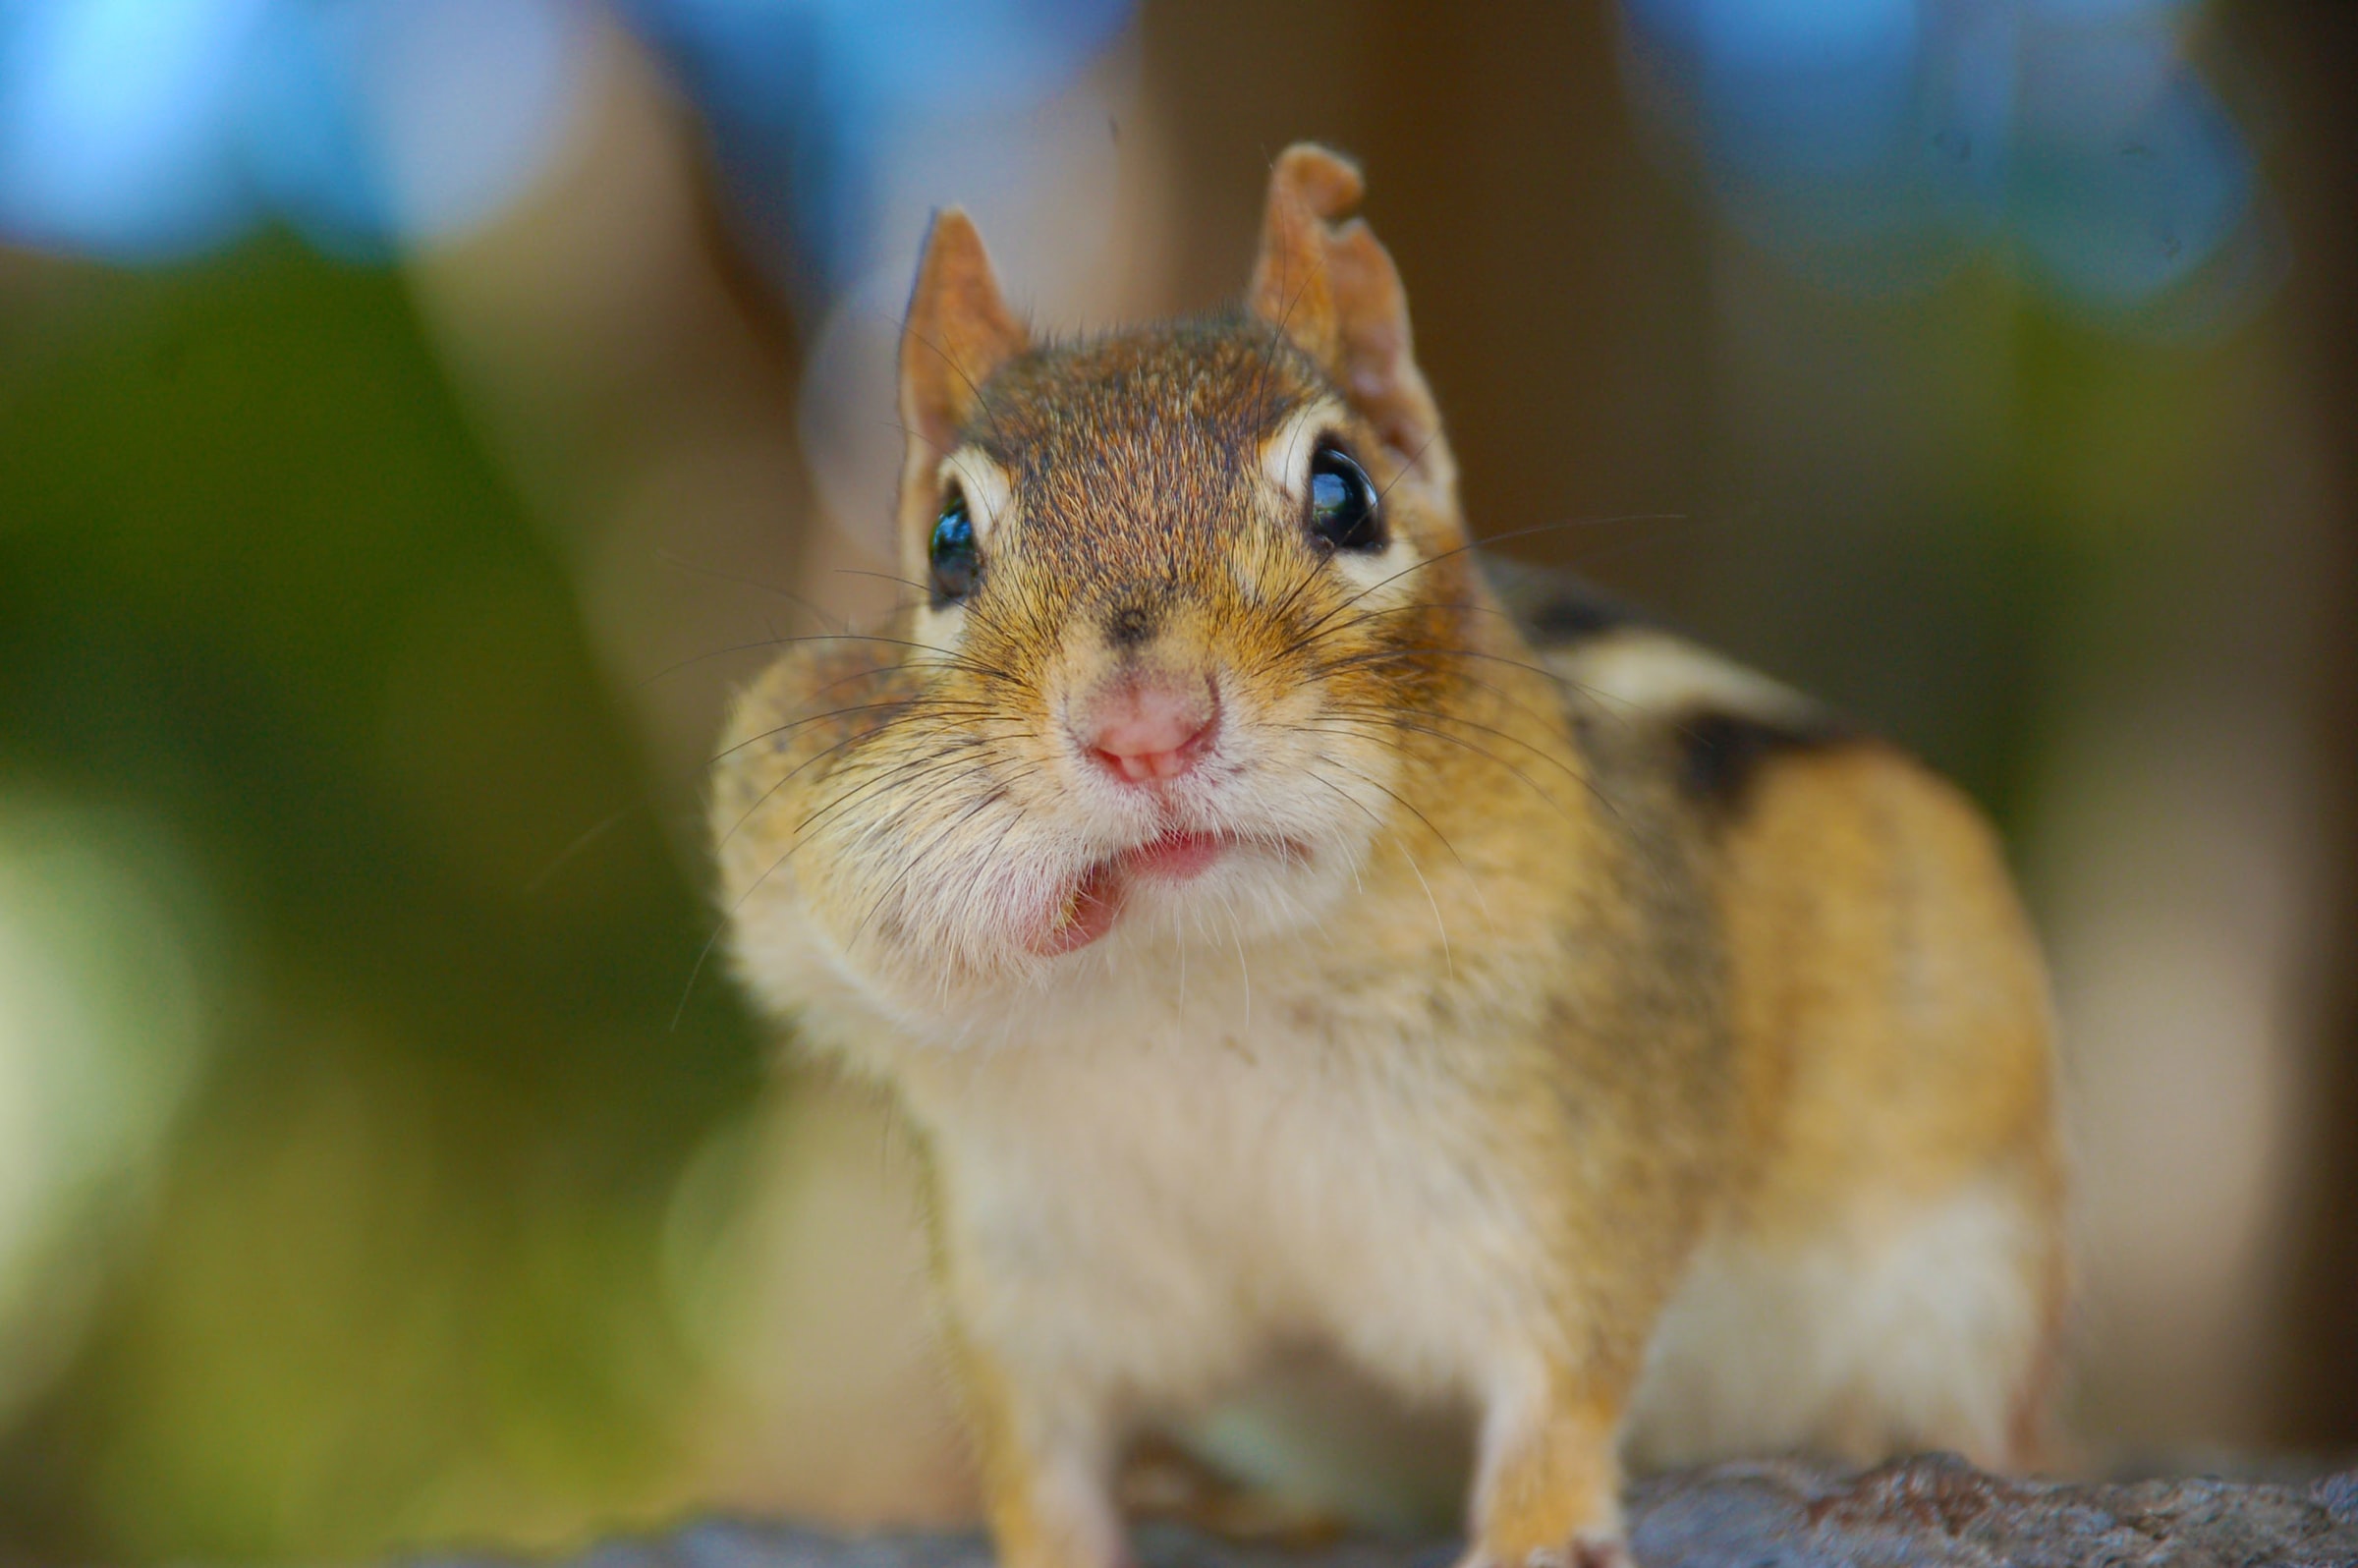 A chipmink with a mouth full of nuts. (photo © Alex Lauzon via unsplash)